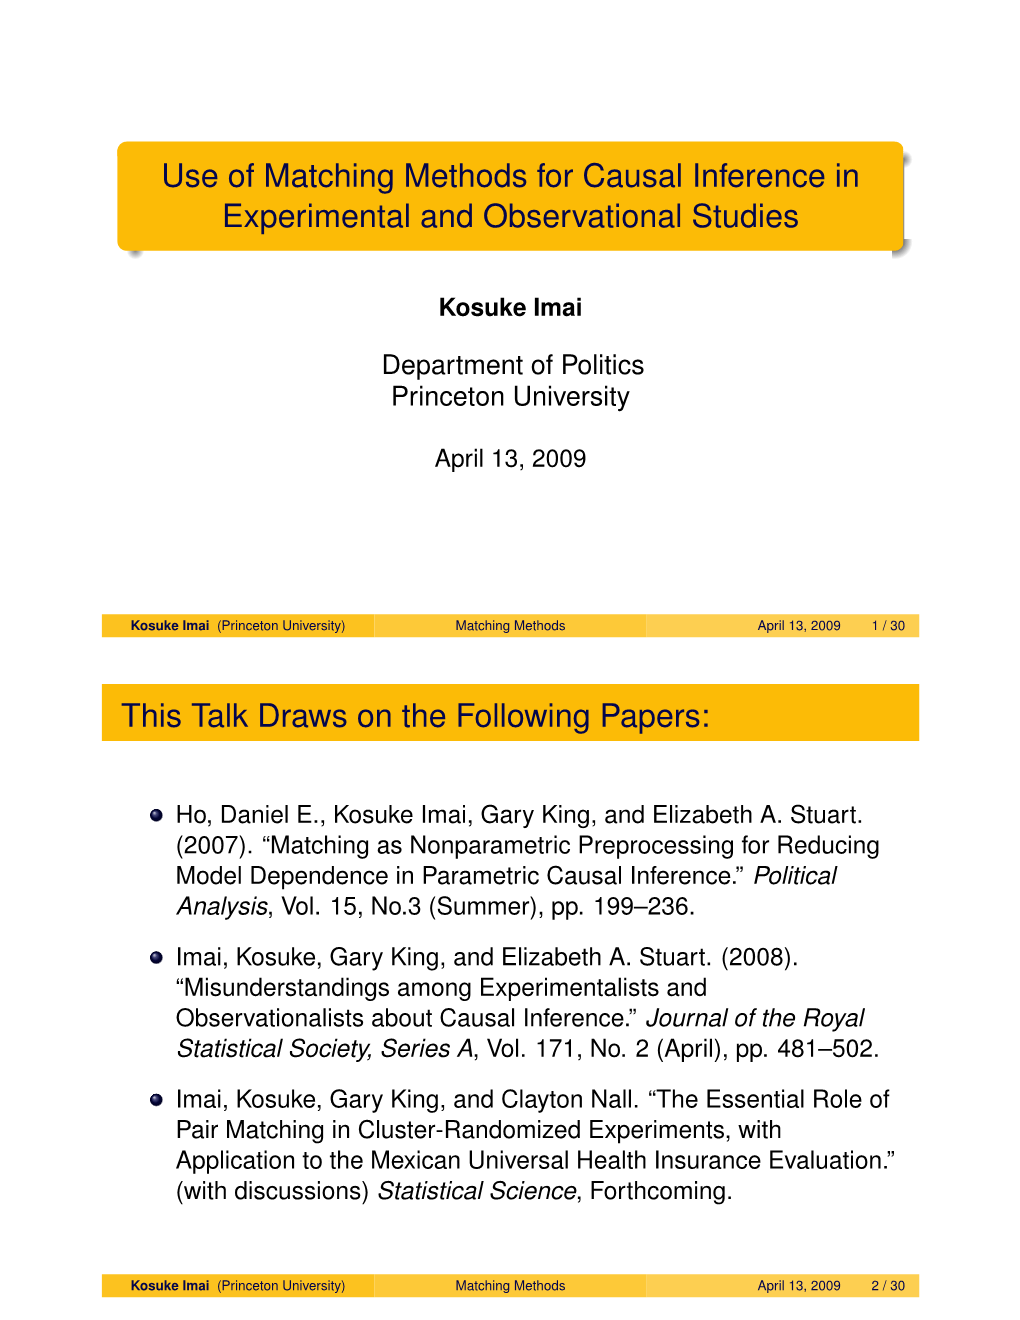 Use of Matching Methods for Causal Inference in Experimental and Observational Studies